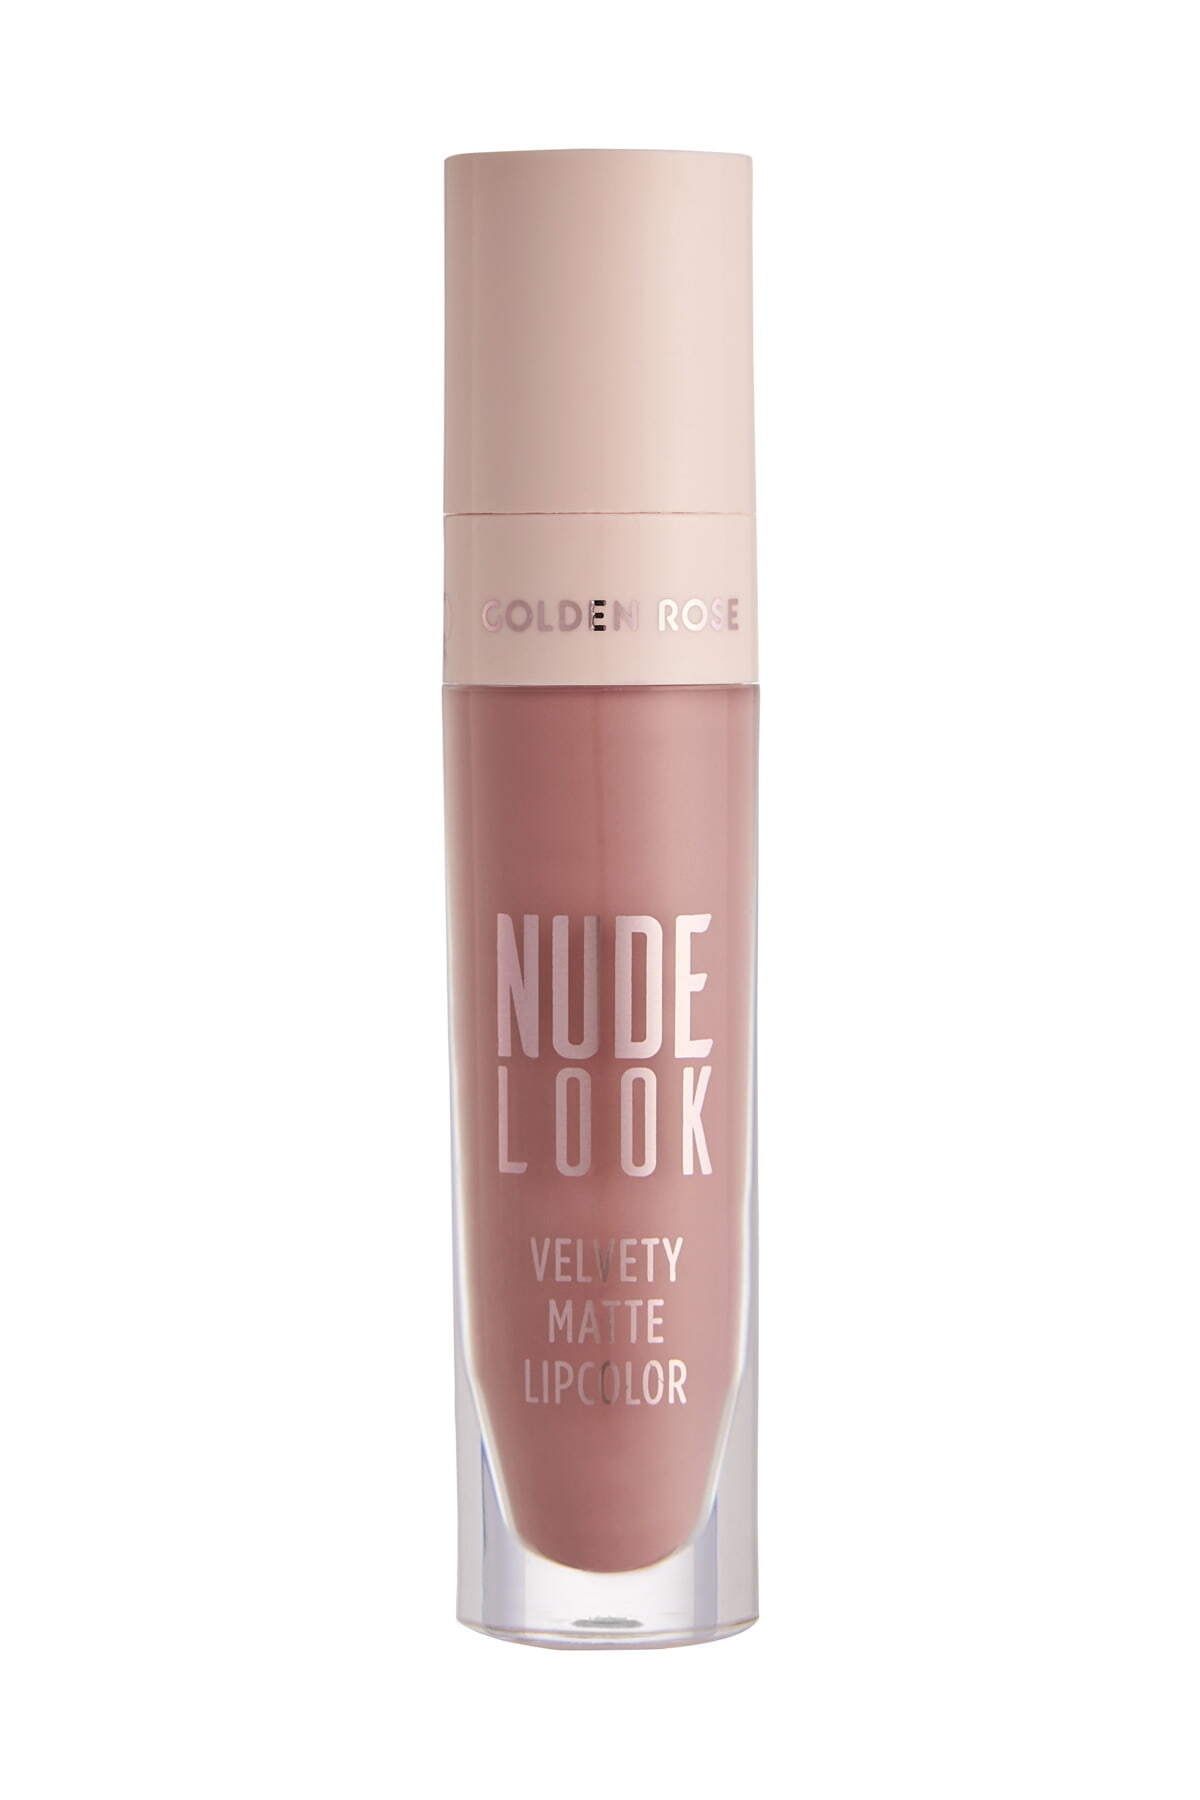 Golden Rose Nude Look Velvety Matte Lipcolor No: 03 Rosy Nude - Likit Mat Ruj